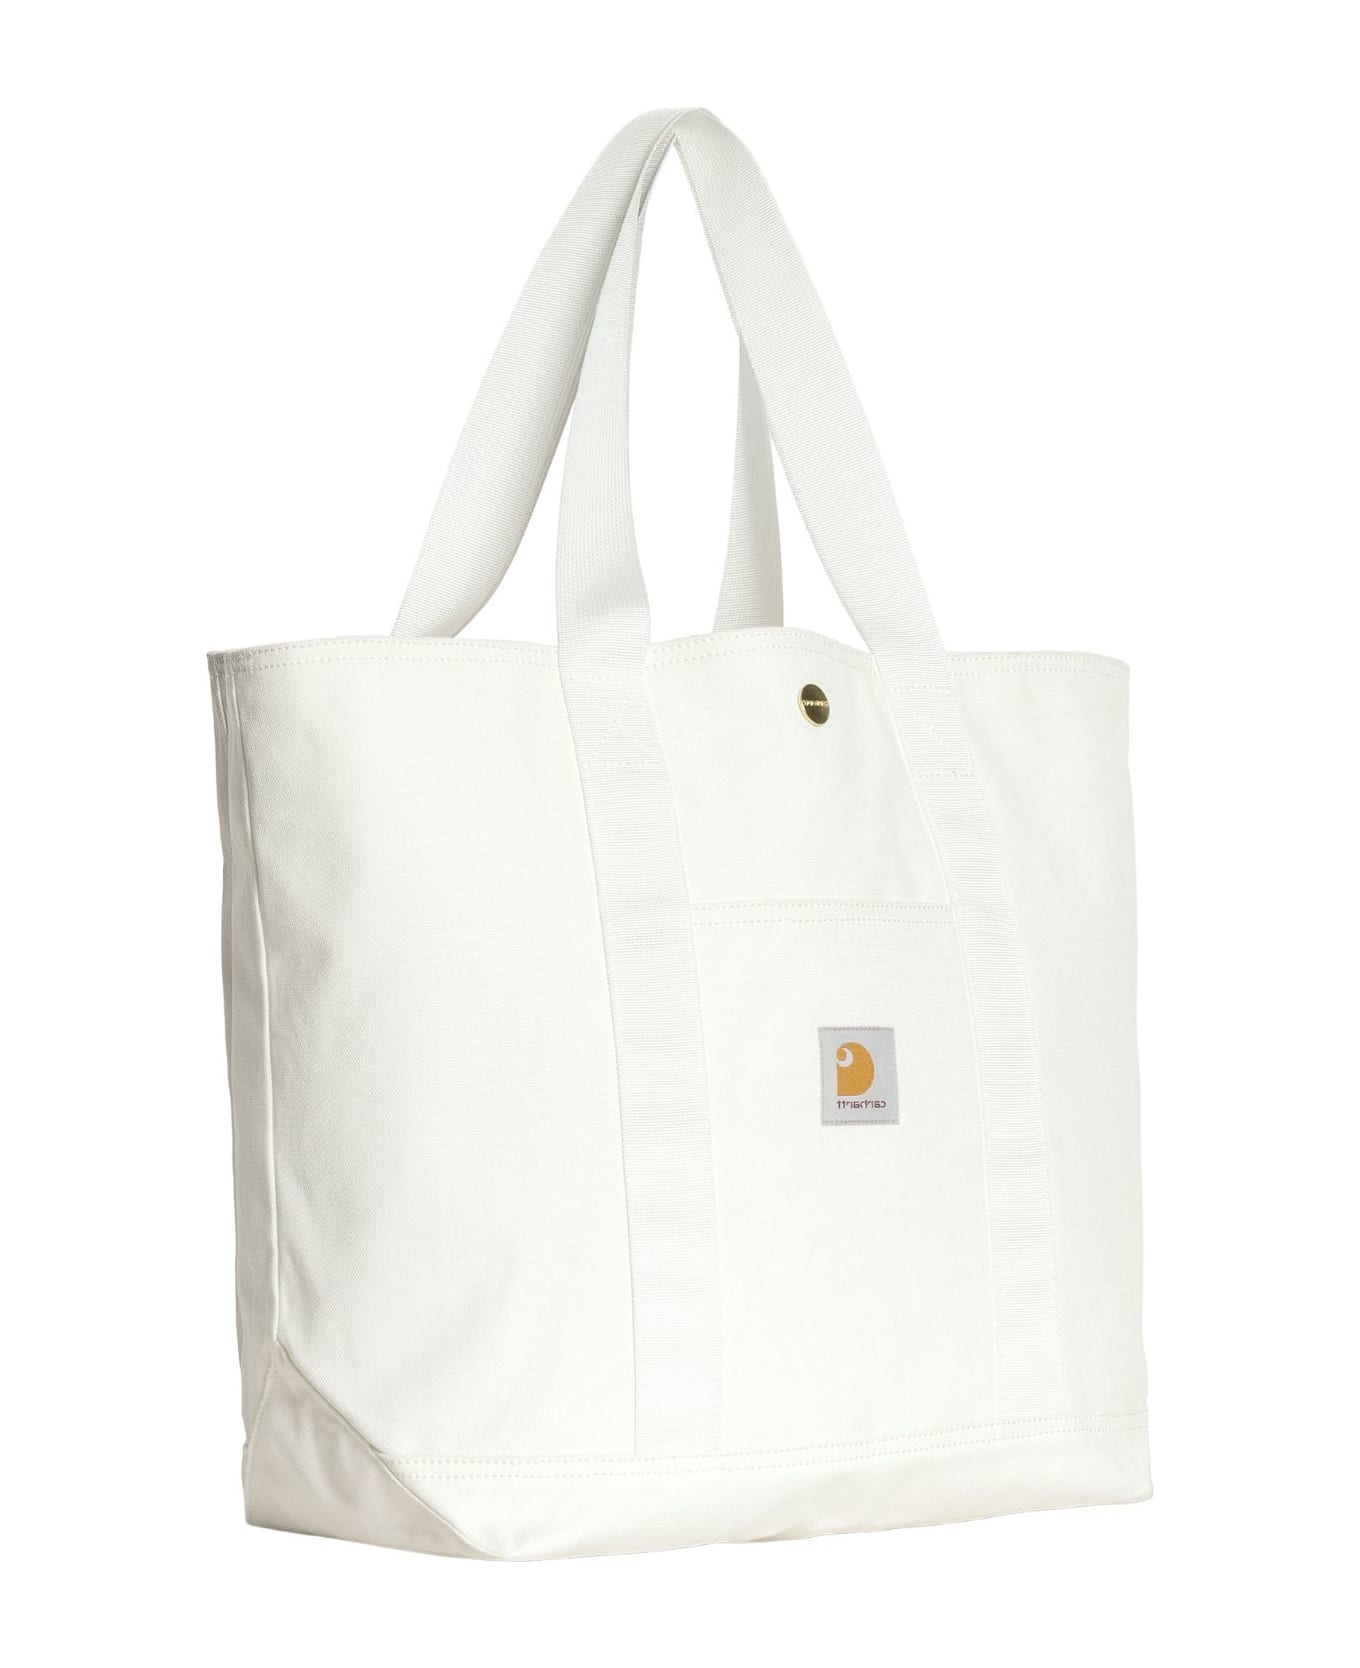 Carhartt Canvas Tote - Wax Rinsed